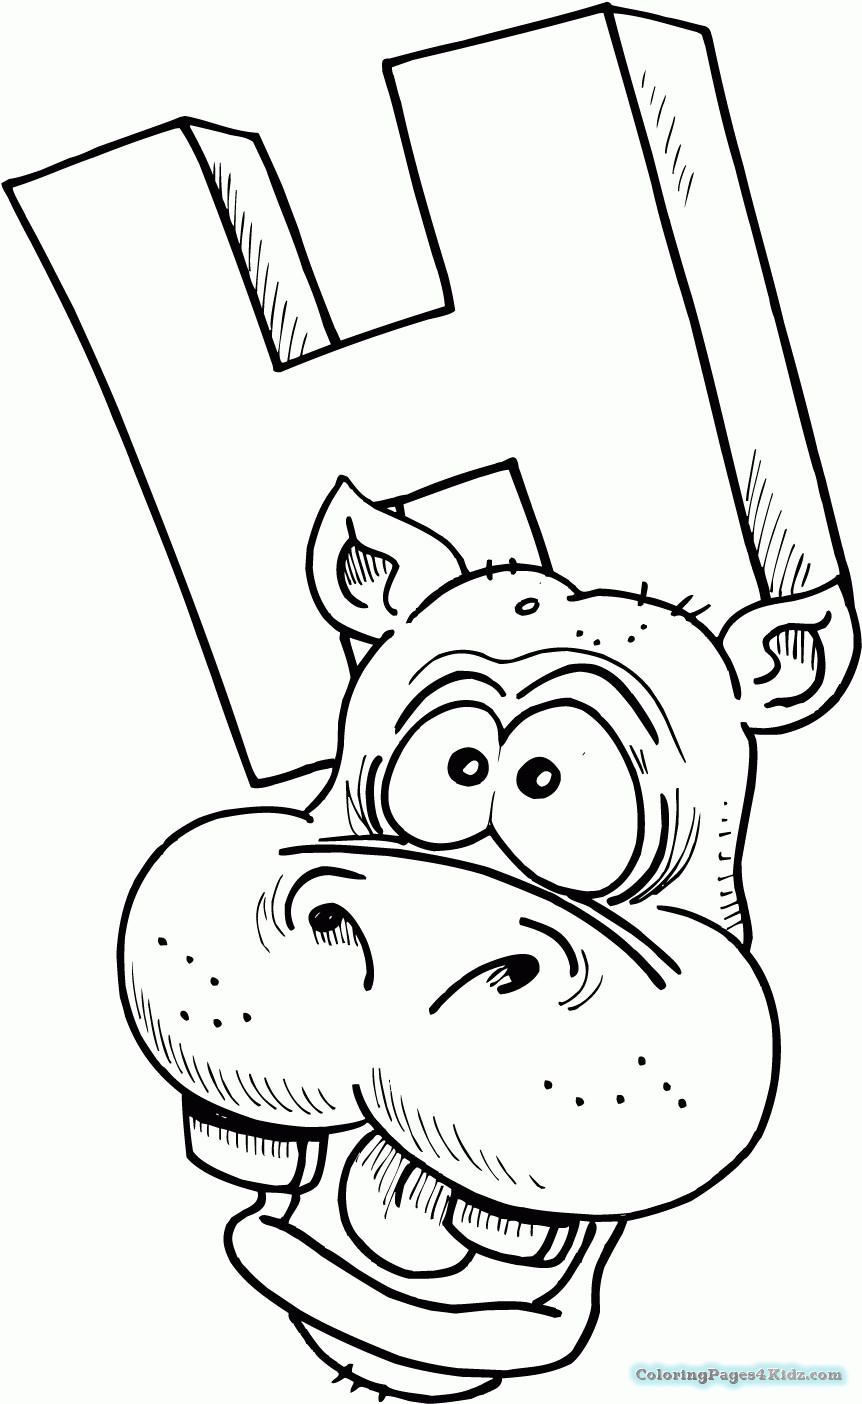 Letter H Coloring Pages For Toddlers
 My Letter H Coloring Pages